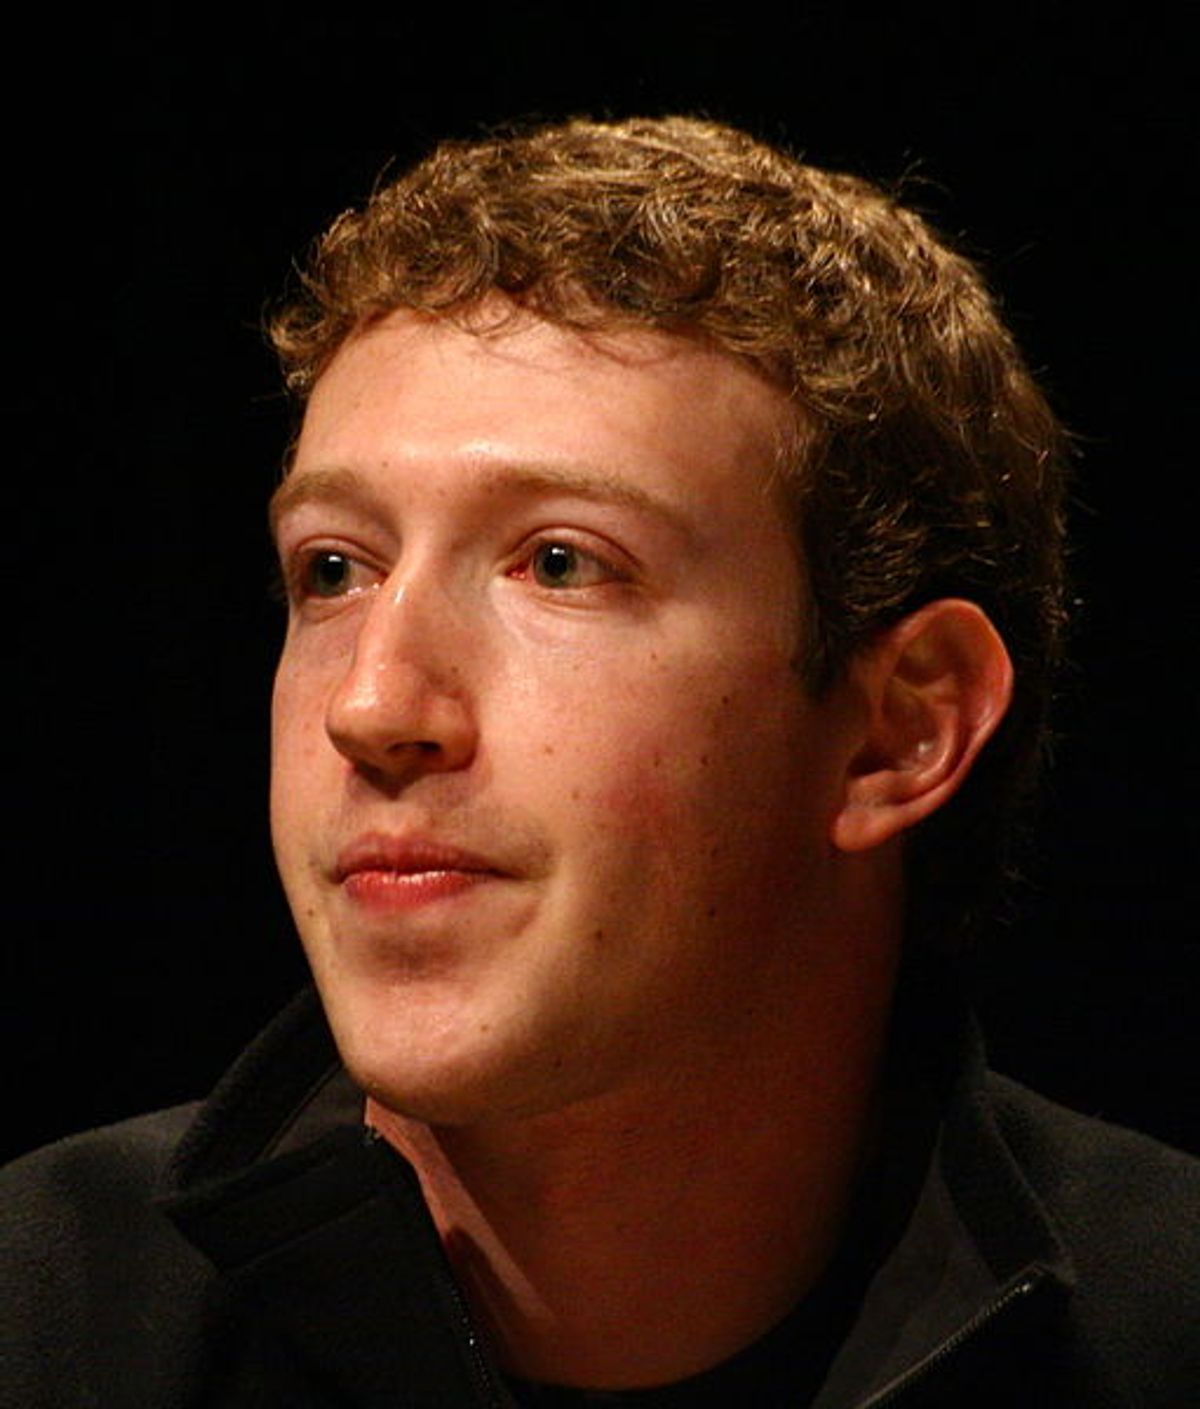 Mark Zuckerberg was named Time "Person of the Year" for 2010. 